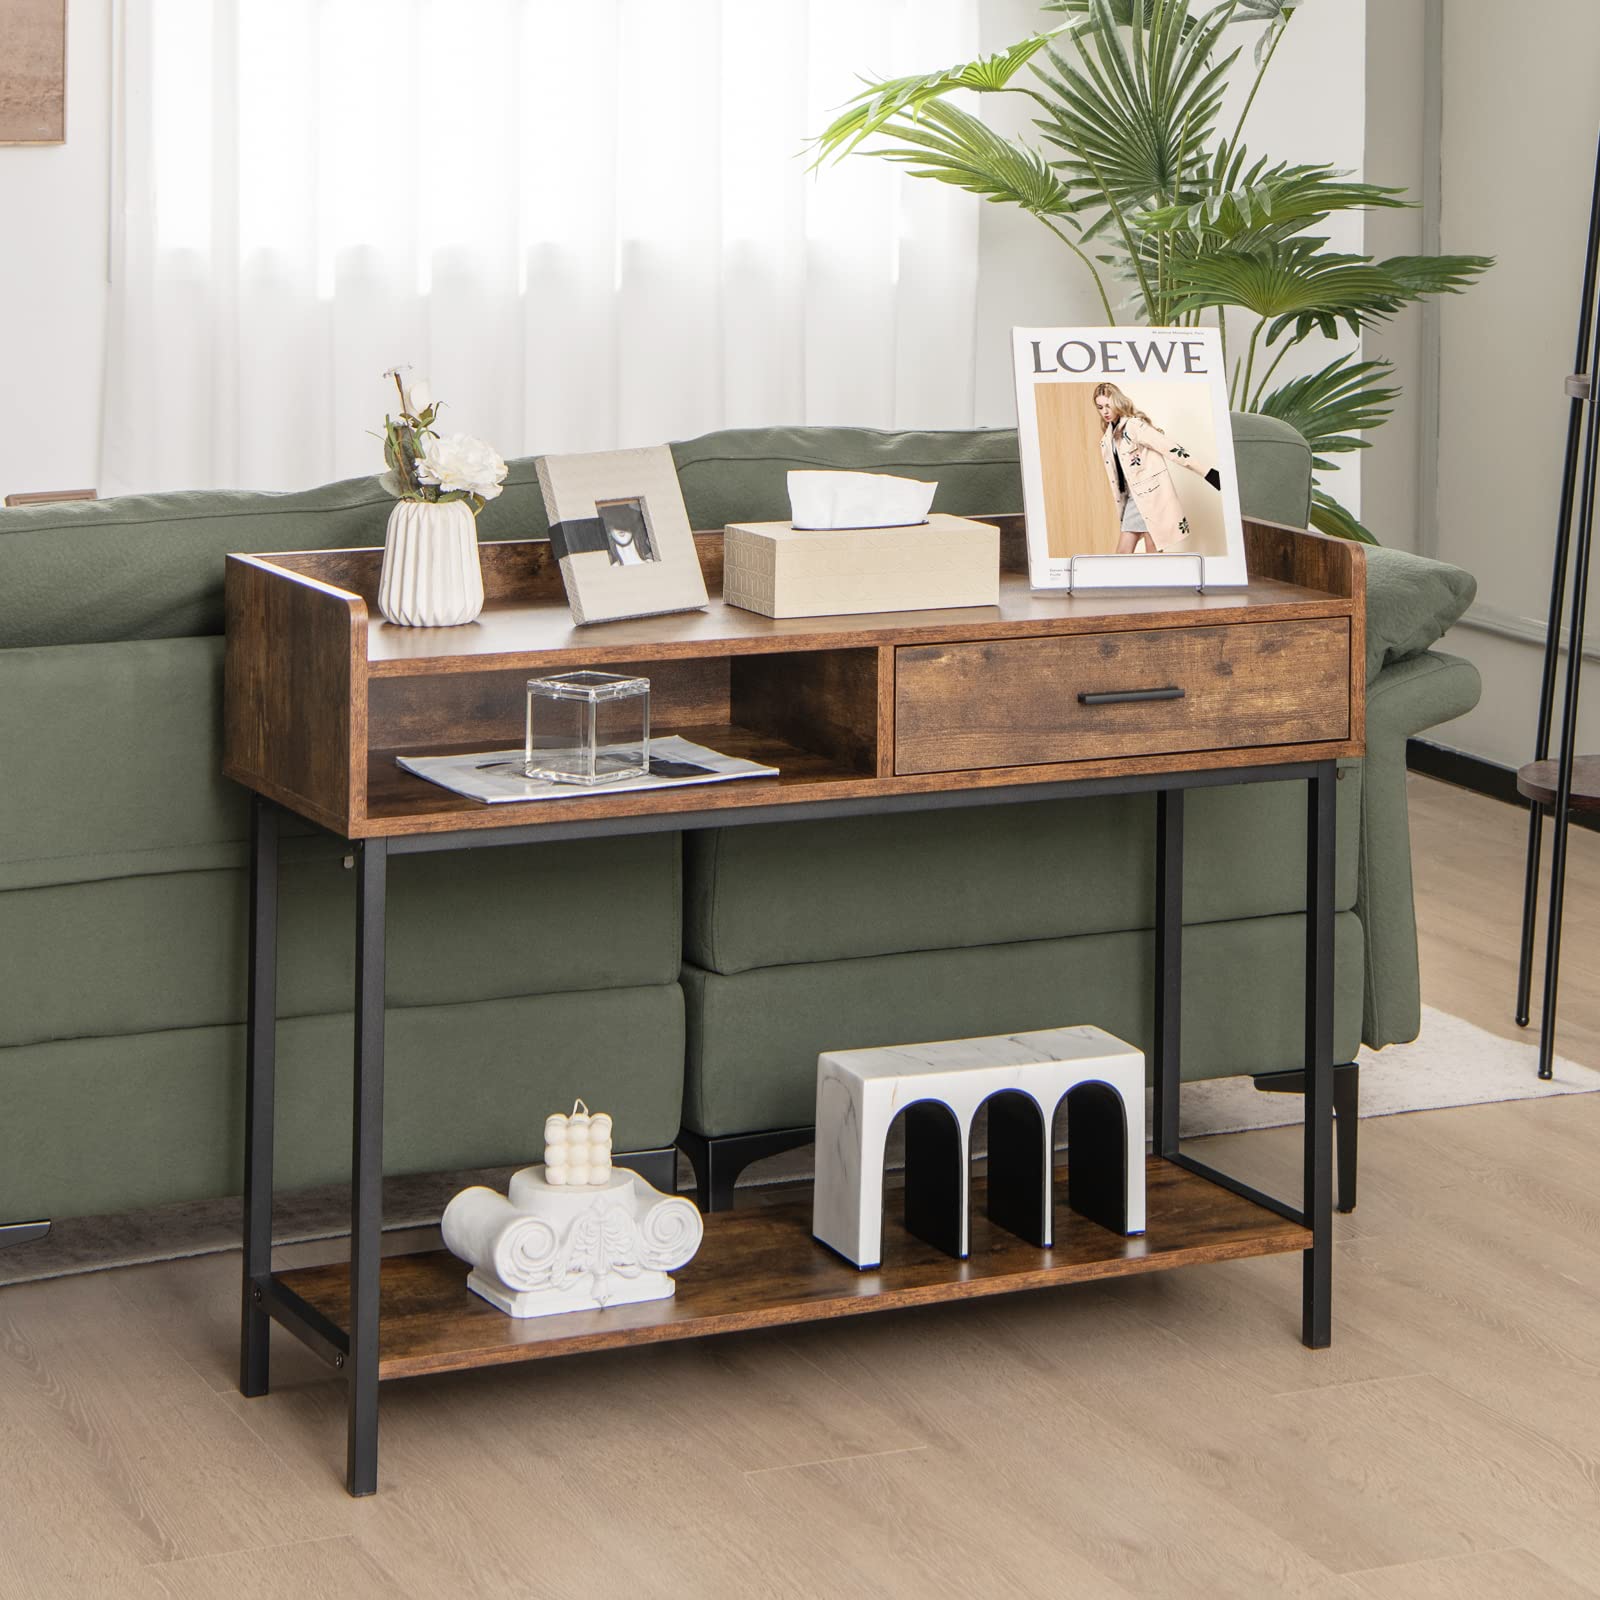 Giantex Long Console Table with Storage - Narrow Entryway Table